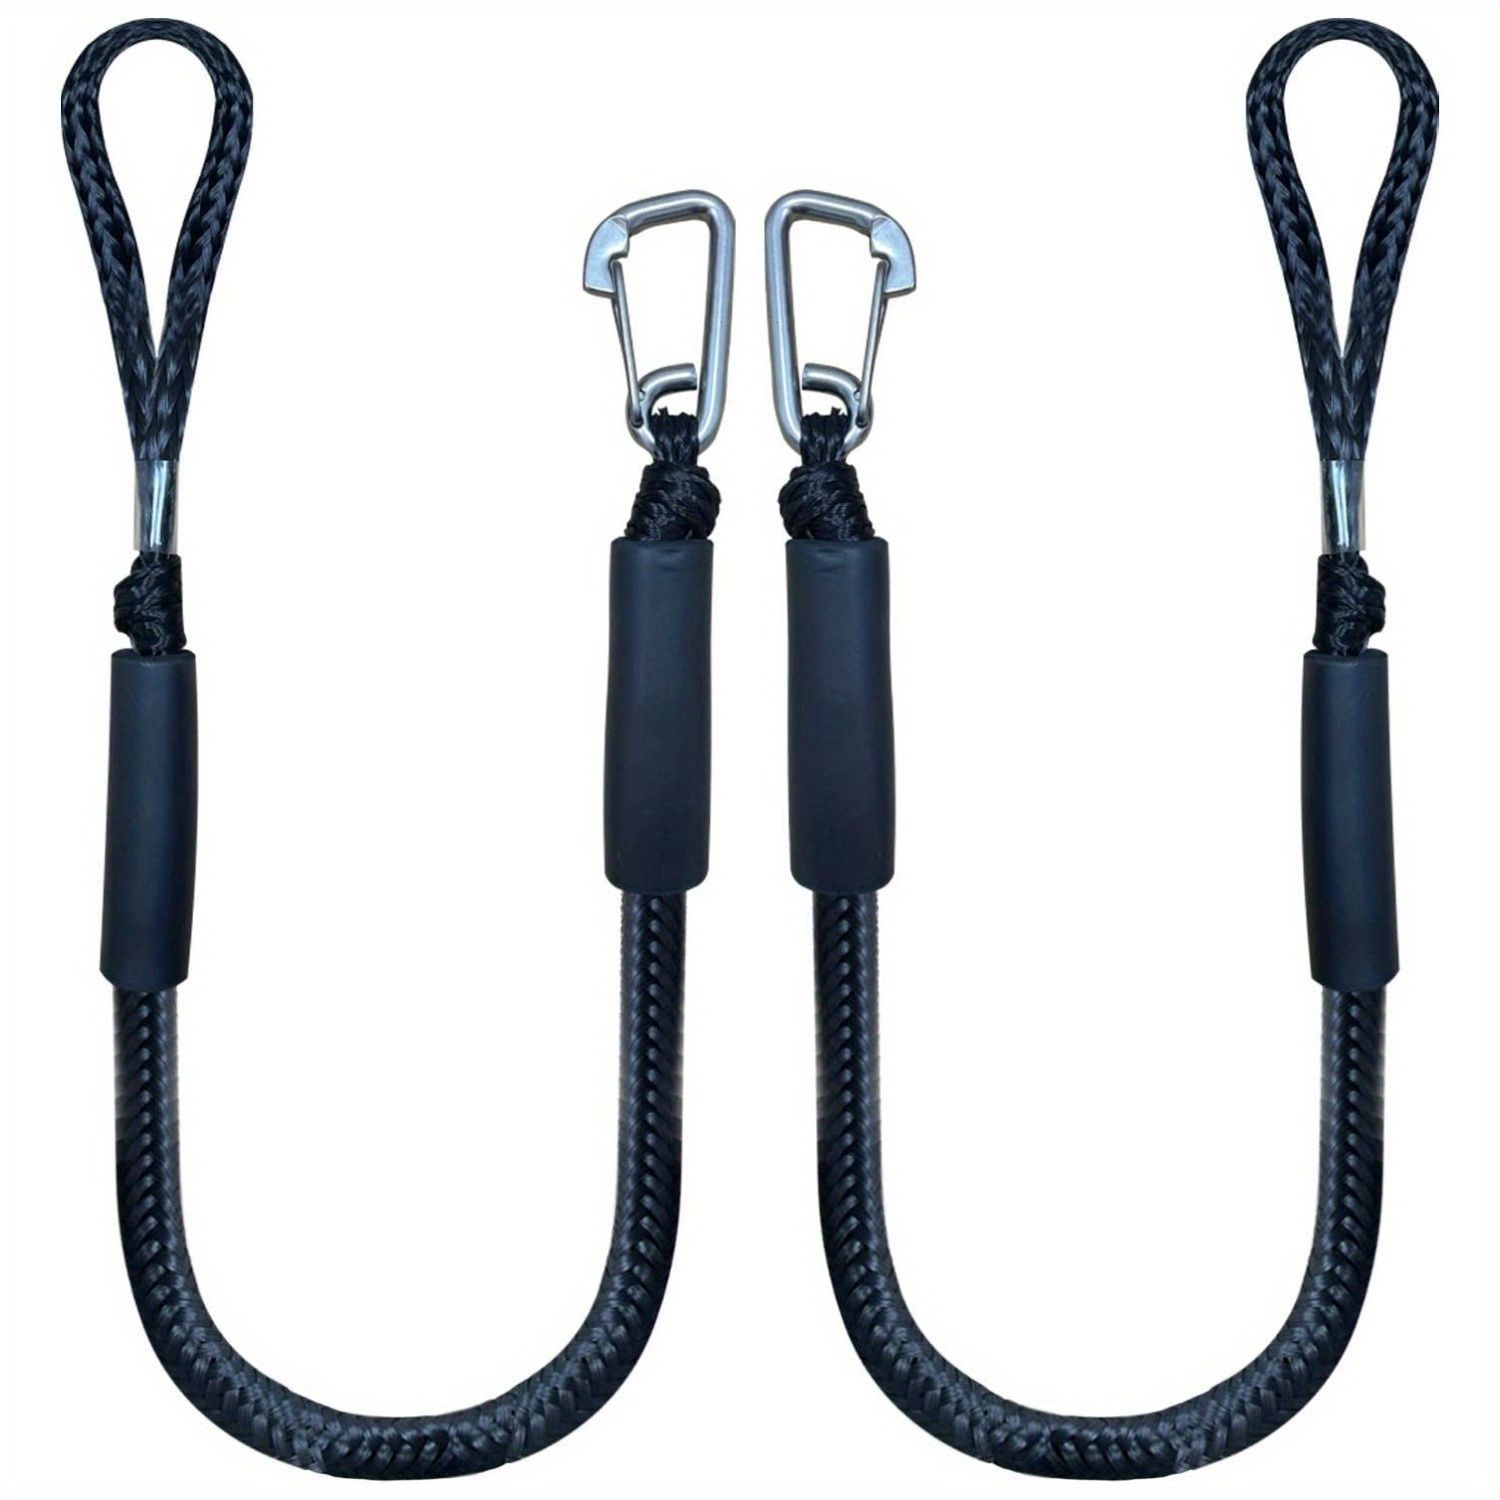 

2pcs Bungee Dock Line Boat Ropes Mooring Rope With Stainless Steel Clip For Boats, Built In Snubber, Suitable For Kayak, Watercraft, , Pontoon, Canoe, Power Boat